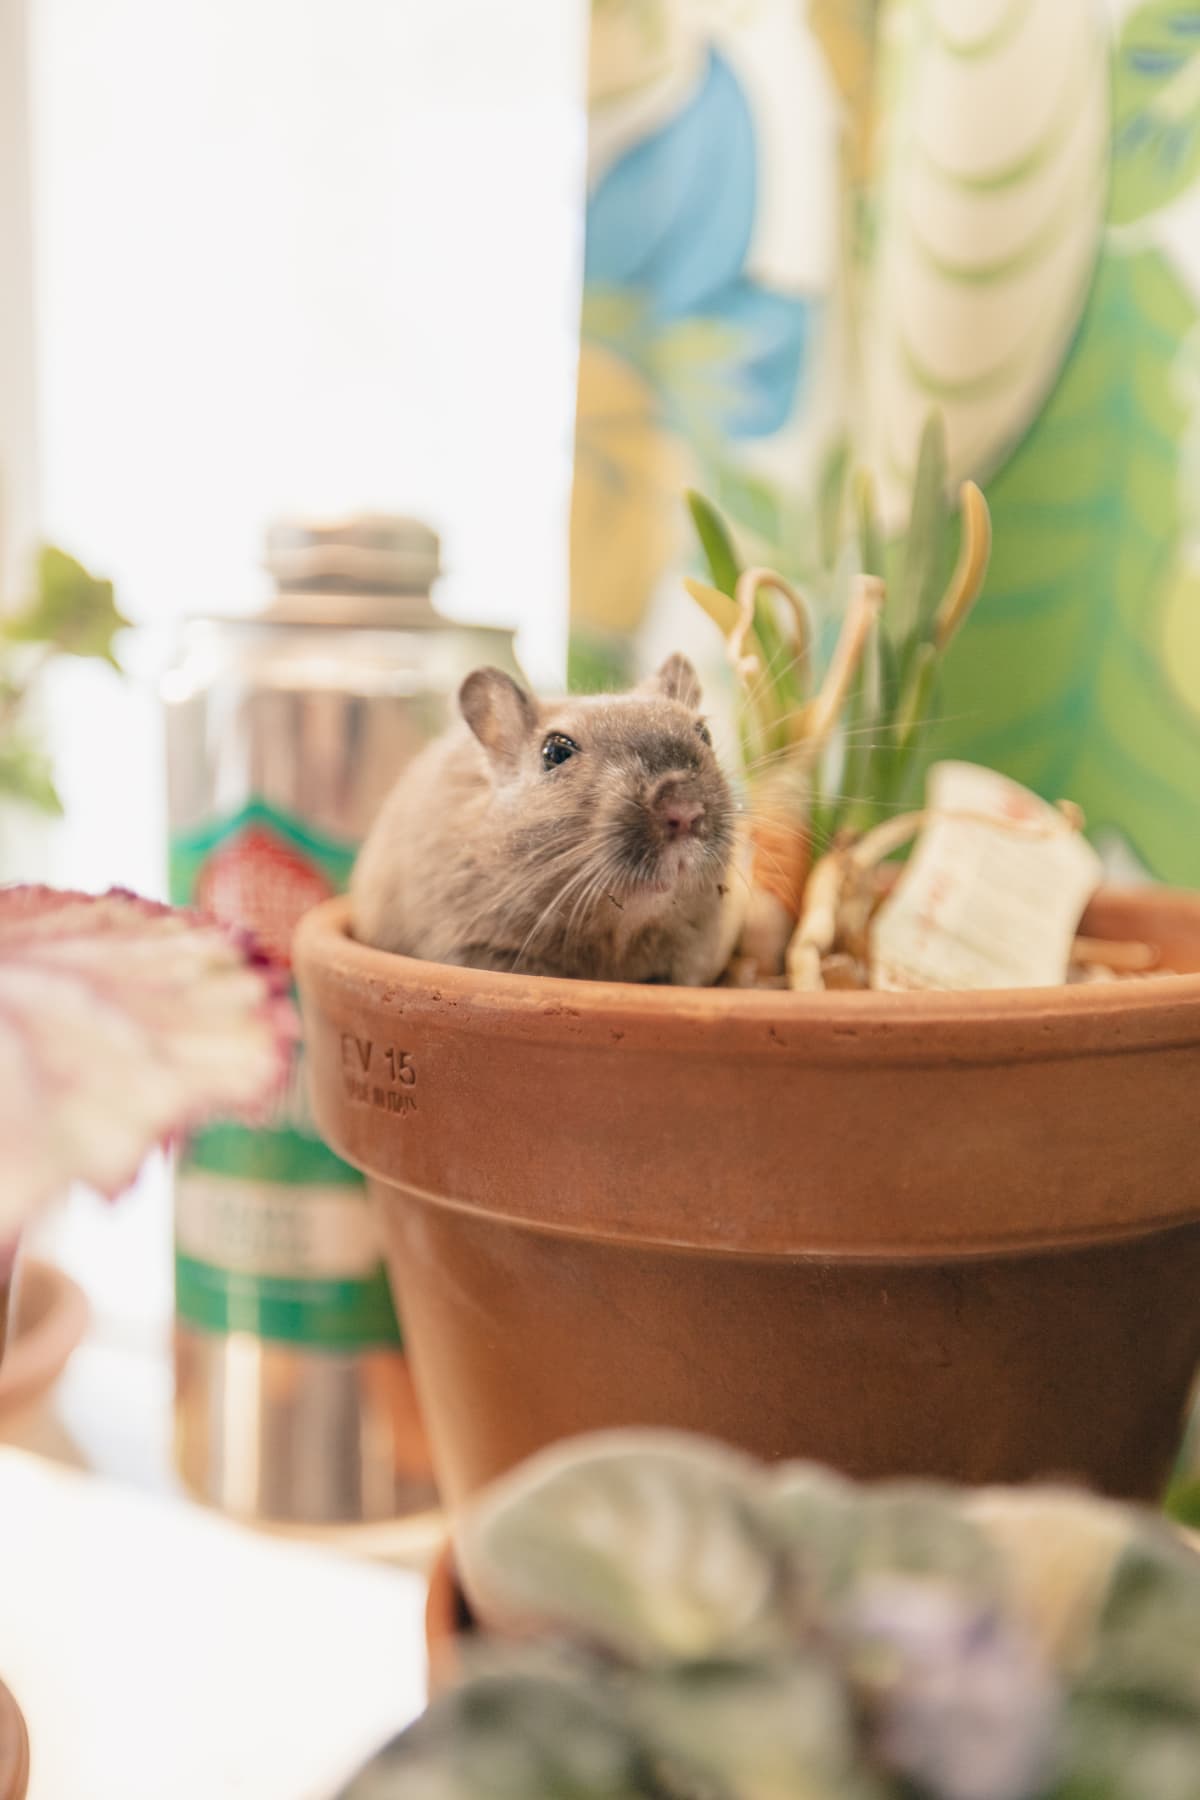 A closeup of a cute rat in a potted plant in the room